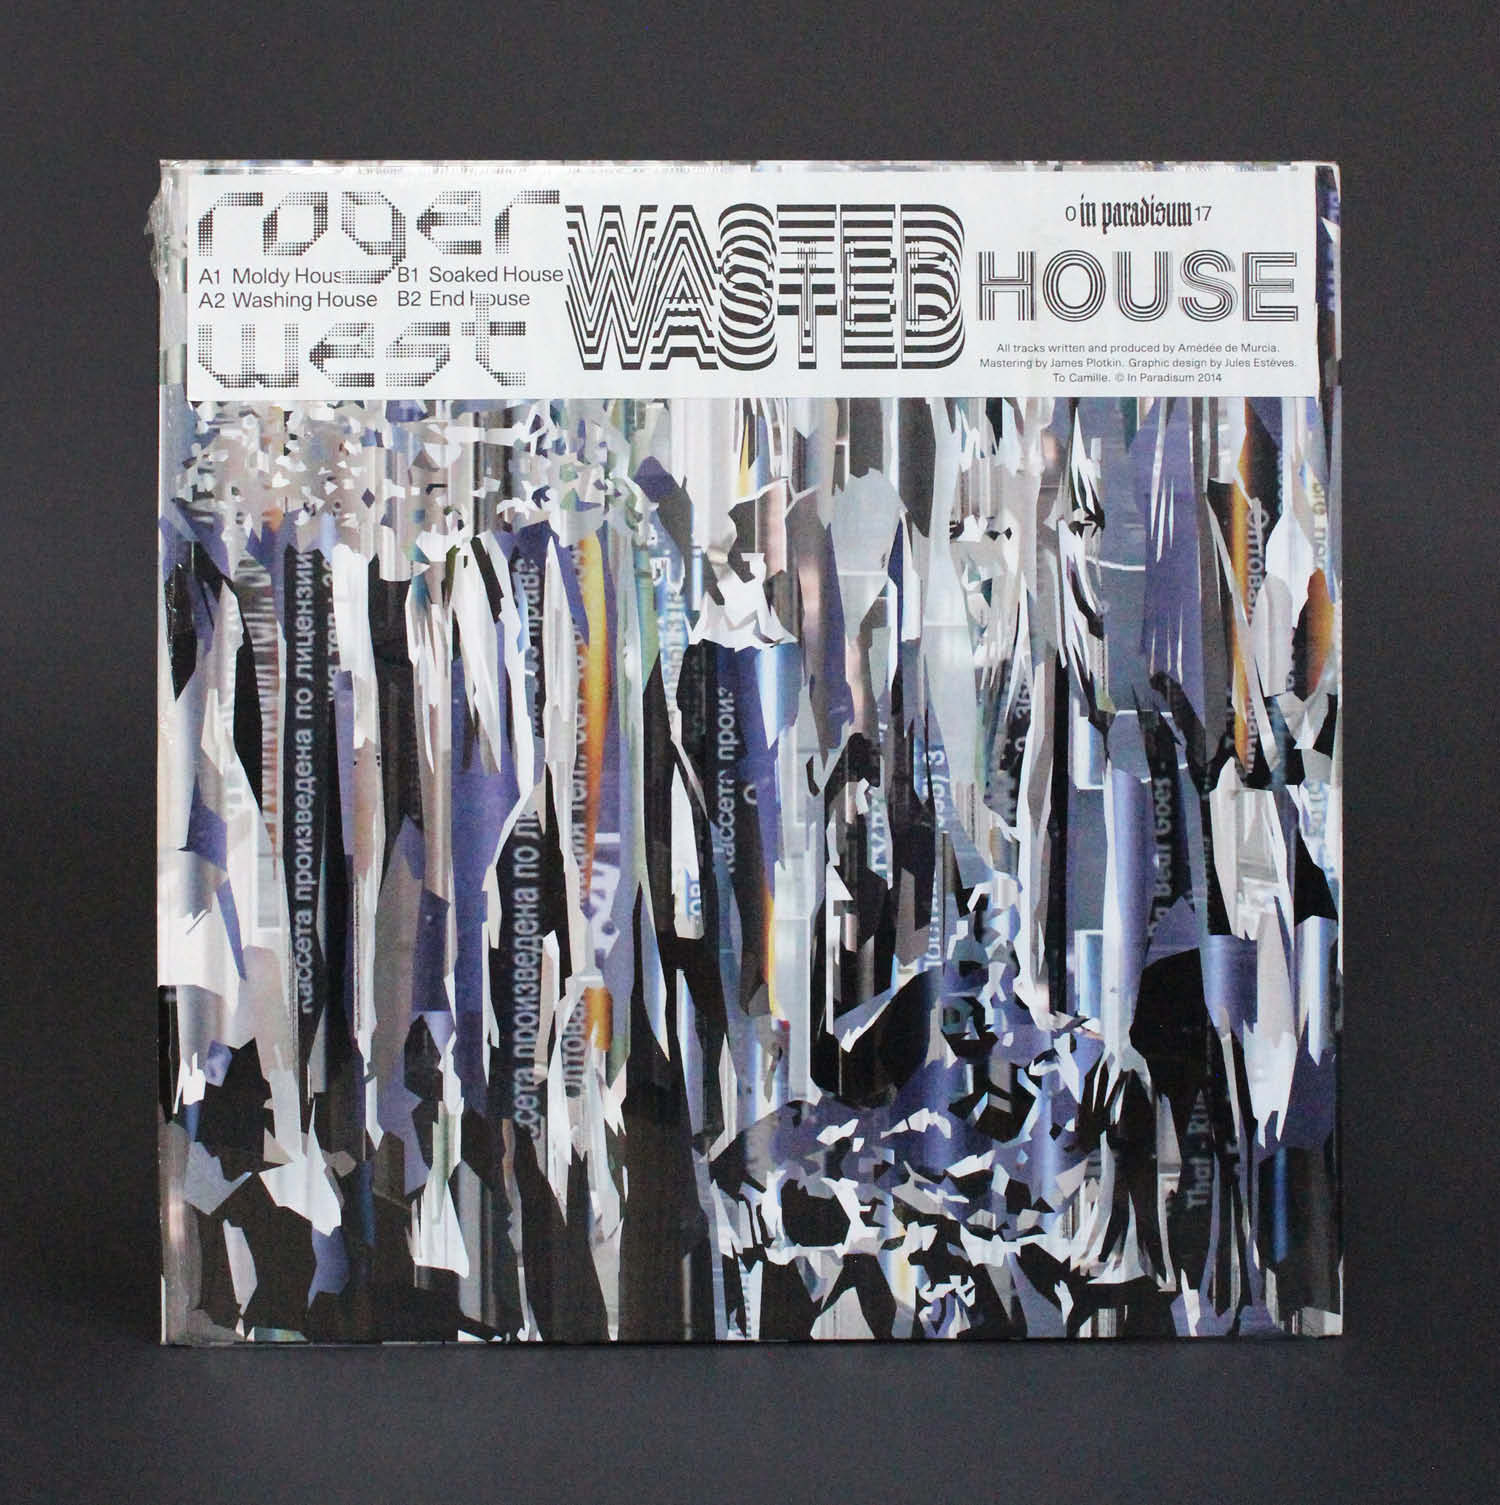 Roger West, record sleeve for Wasted House on In Paradisum